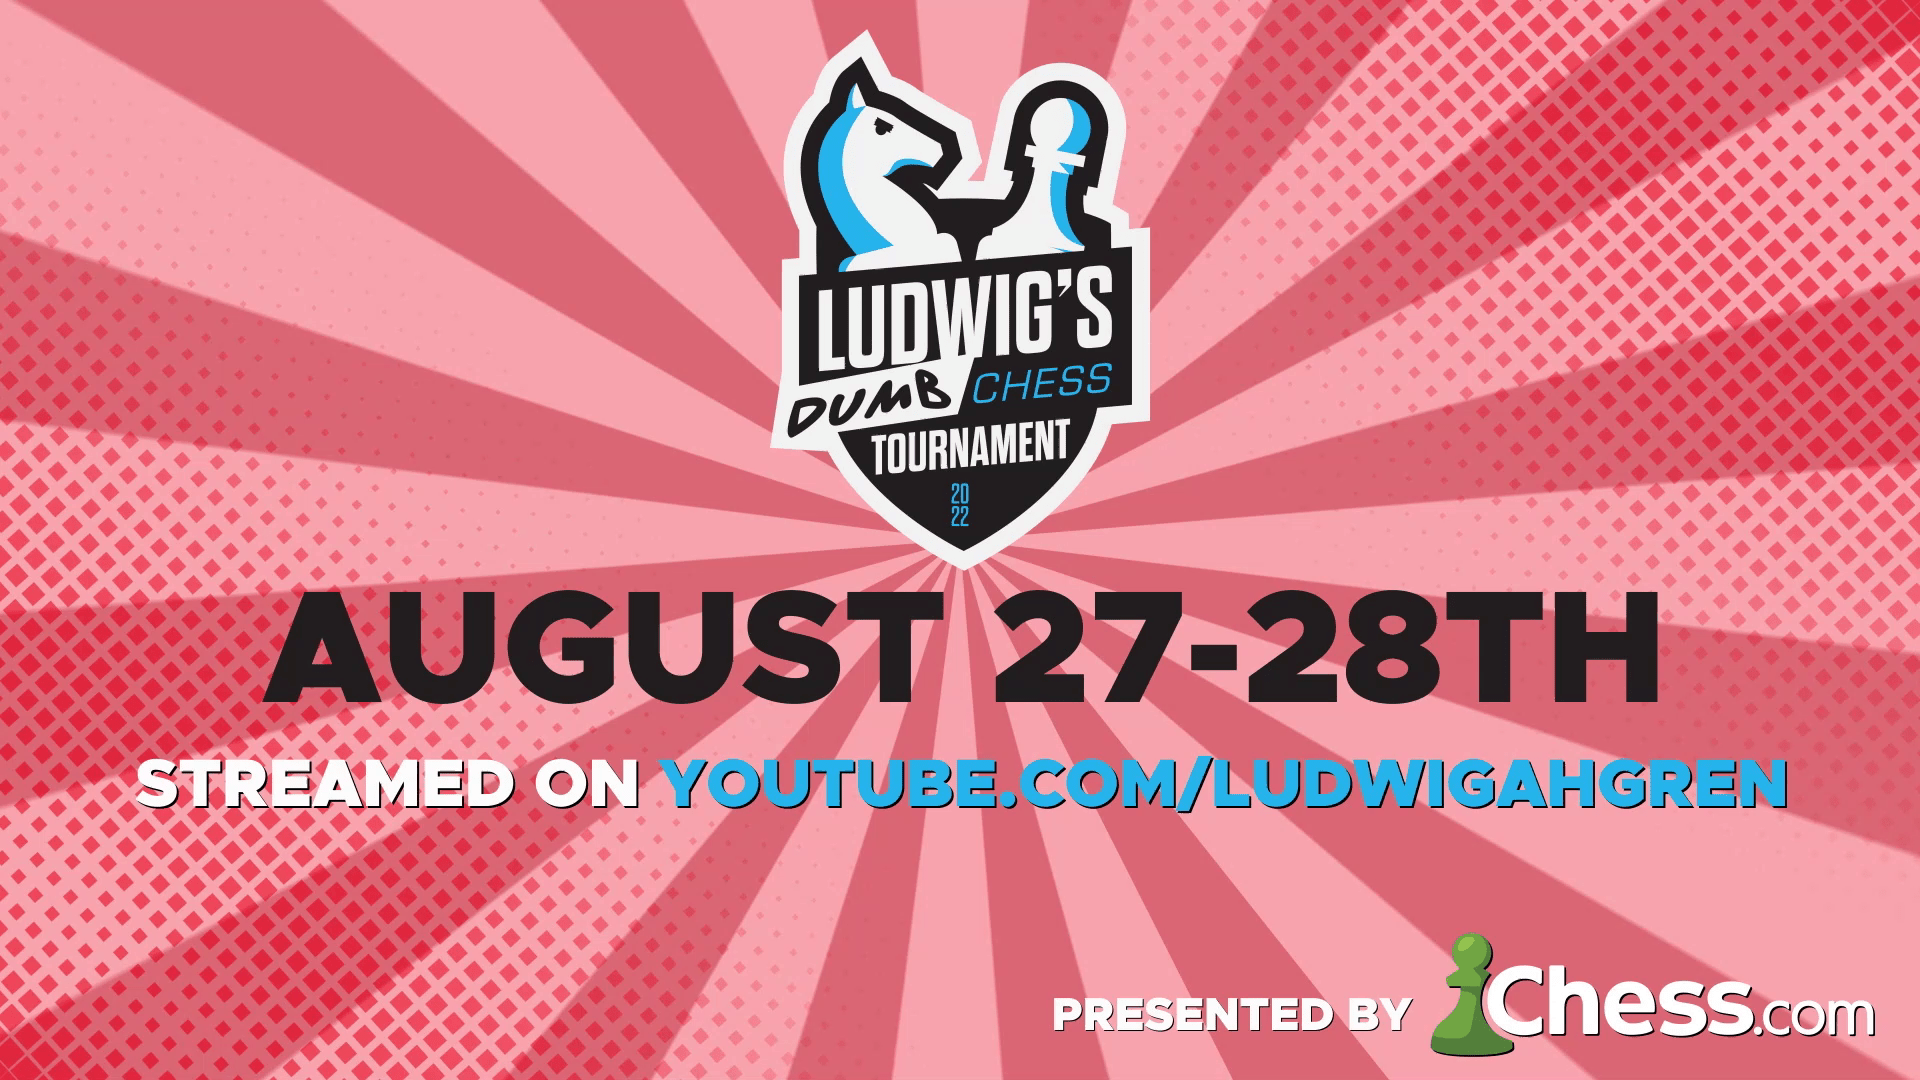 Introducing Streaming Superstar Ludwig’s “Dumb Chess” Tournament